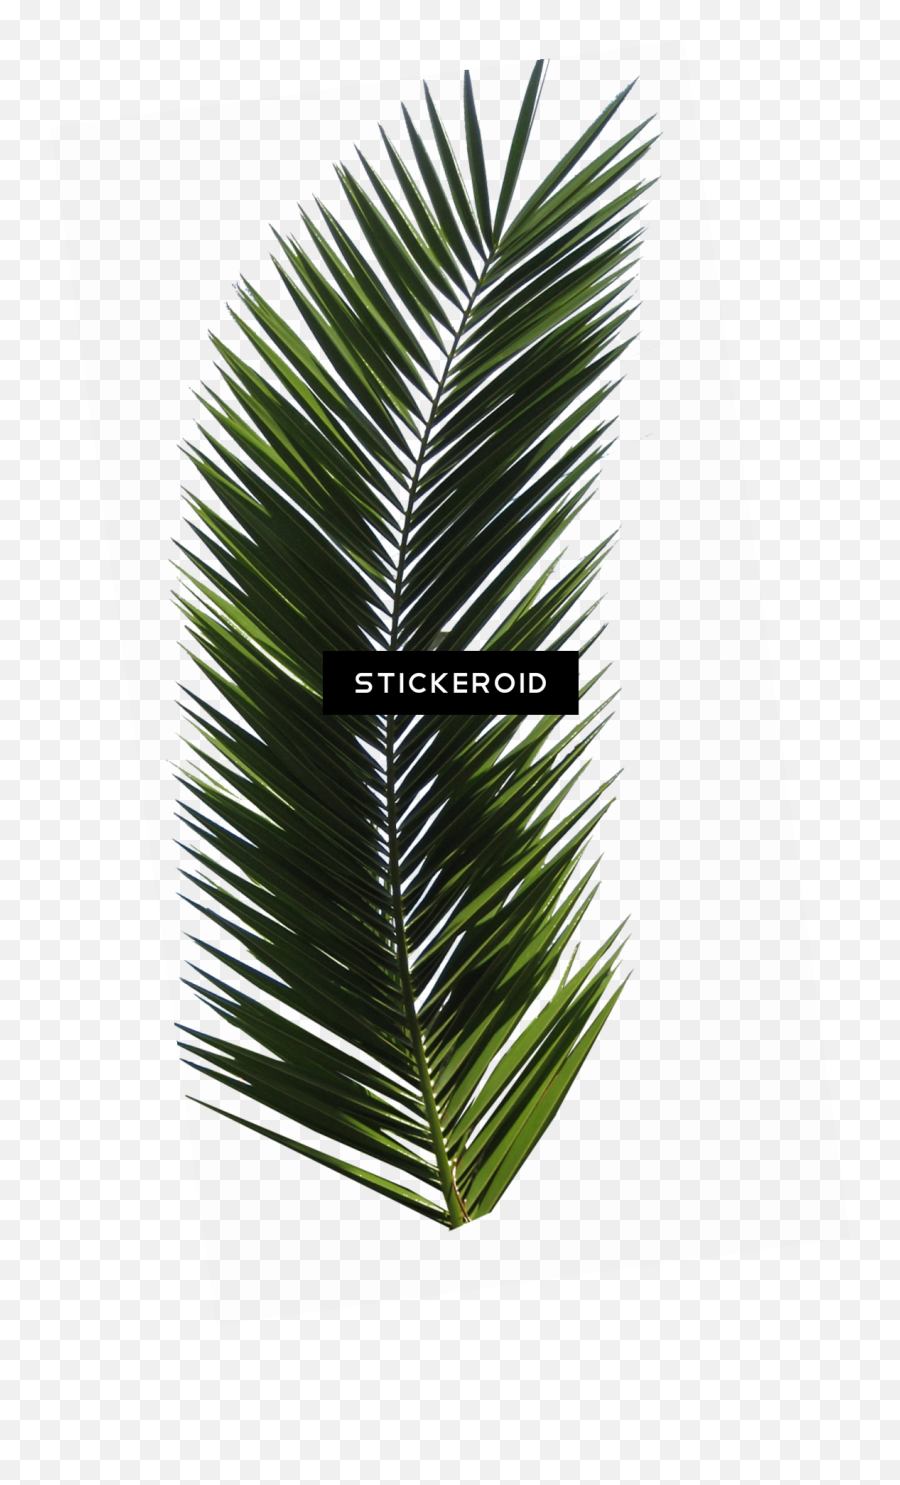 Palm Tree Leaf Png Image - Palm Tree Leaf,Palm Tree Leaves Png